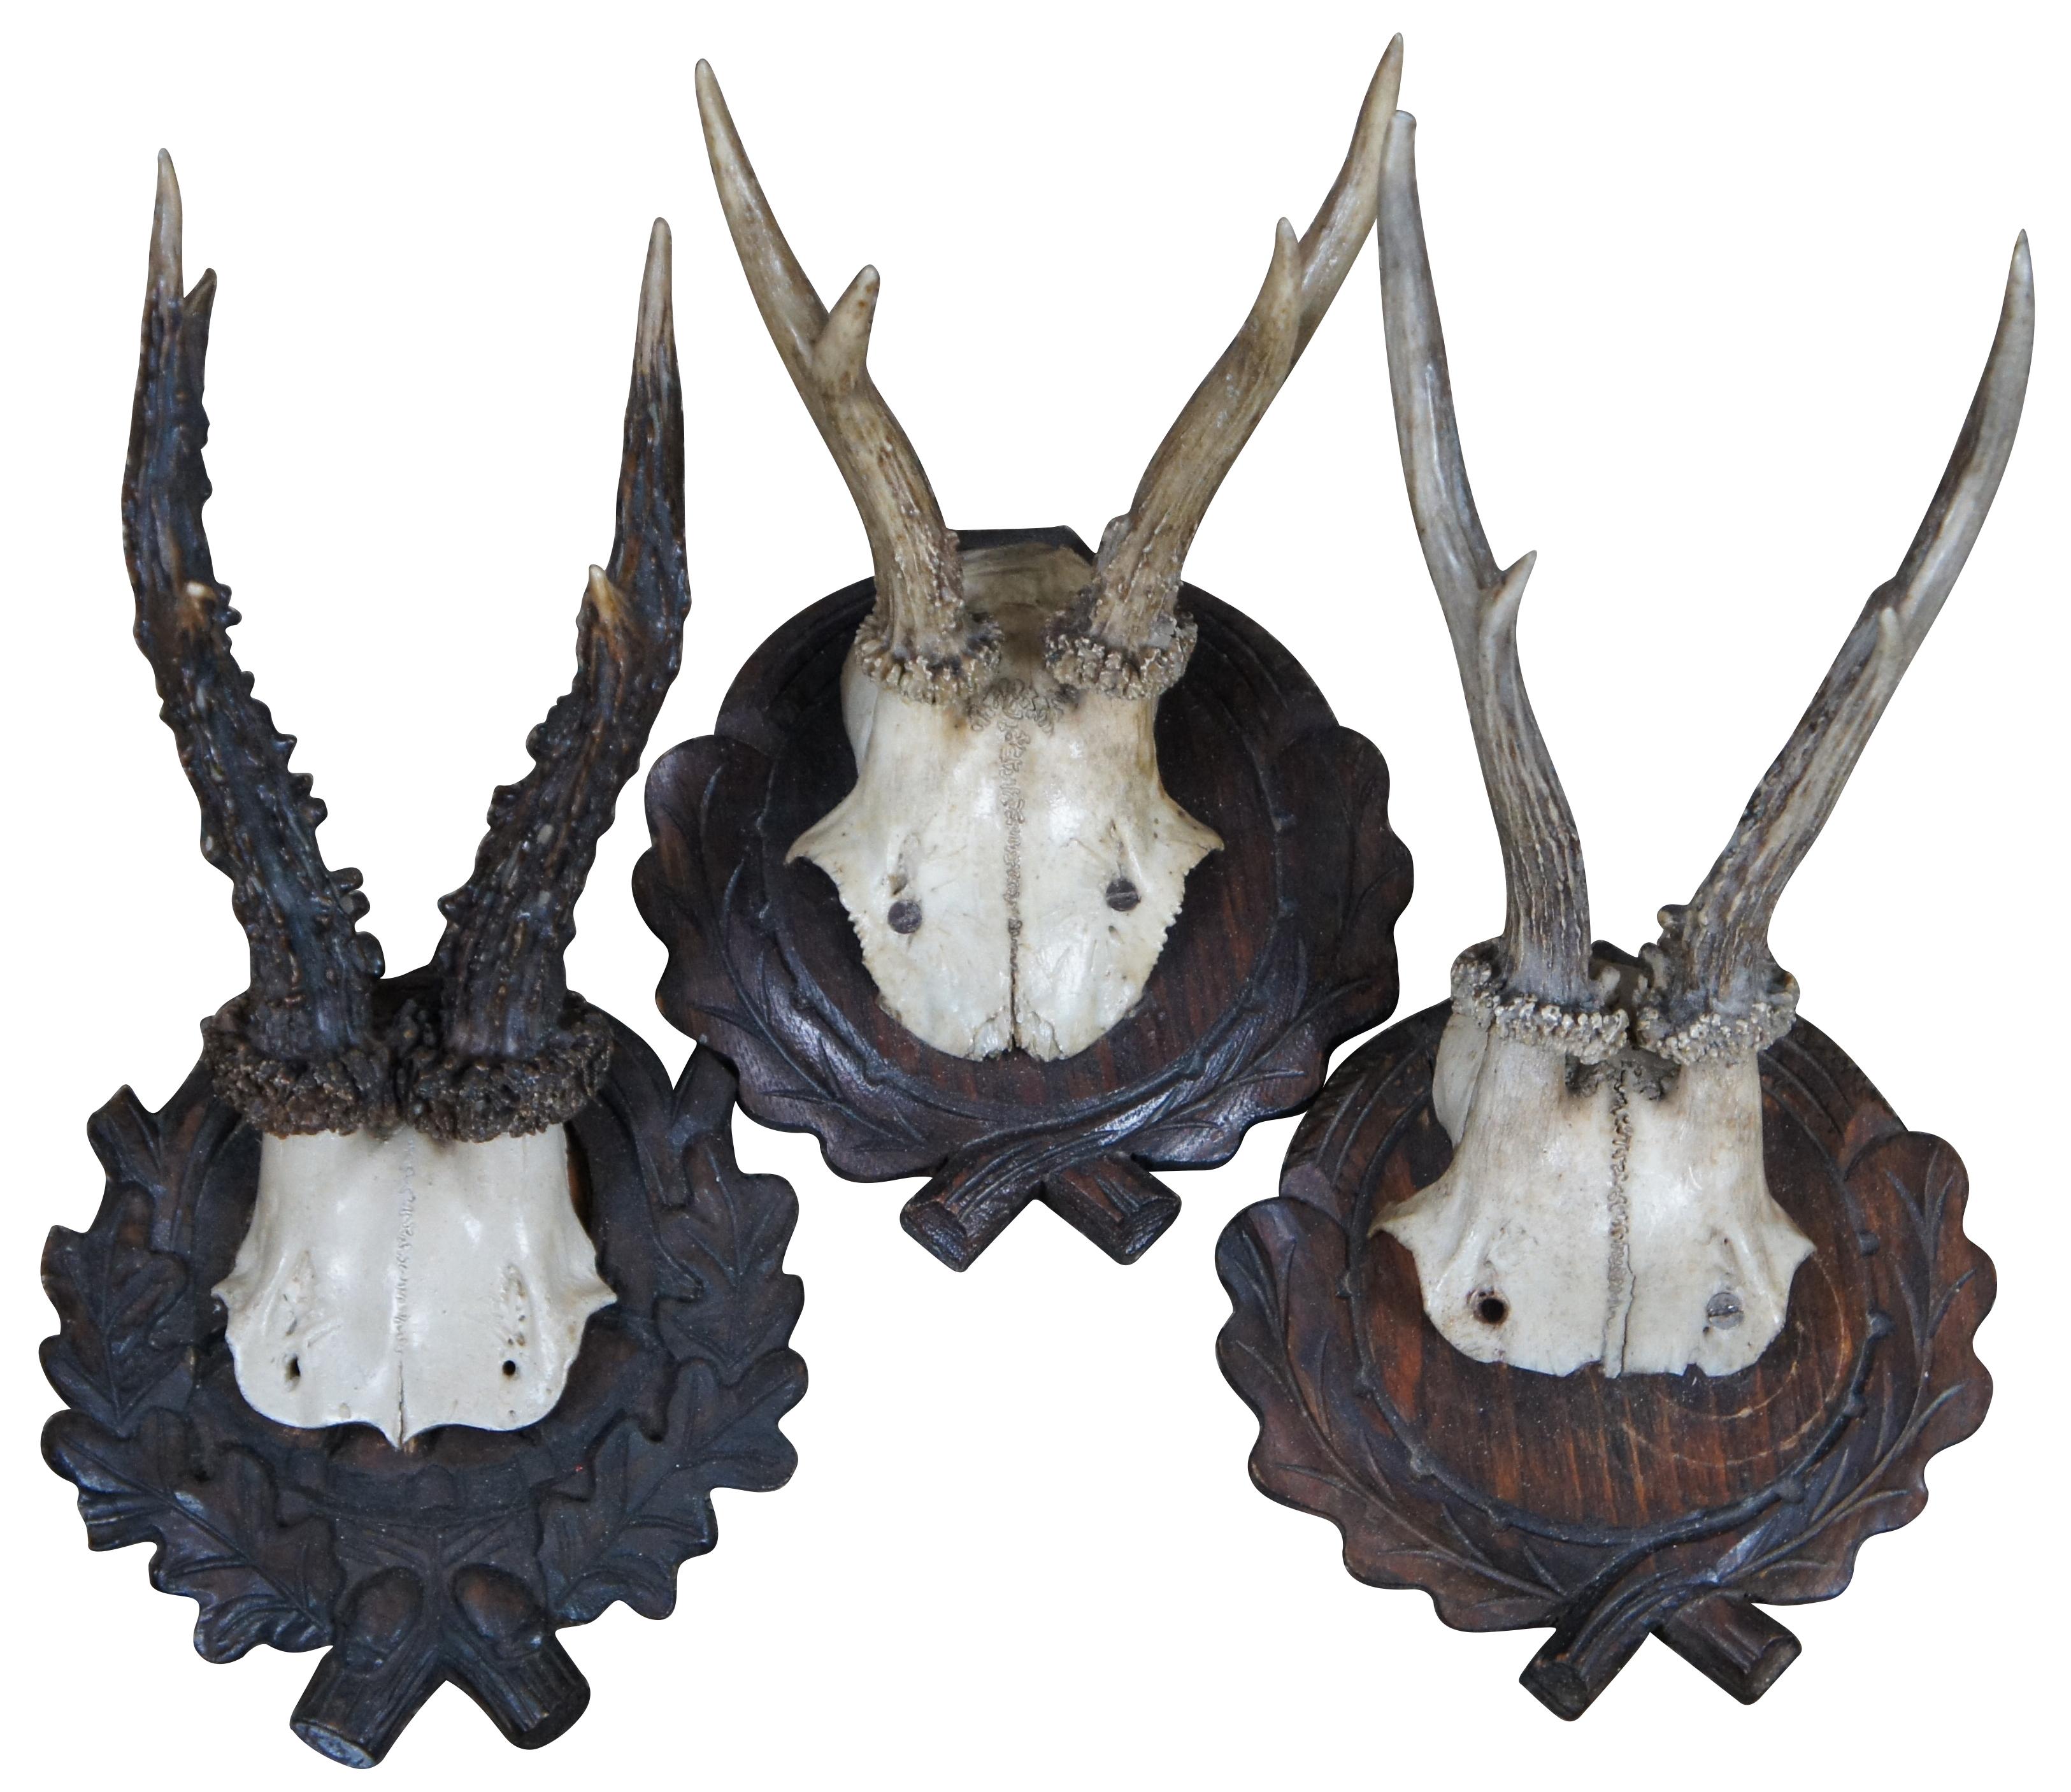 Lot of five antique mounted roe deer antlers and skull caps on wooden plaques, two simple round black beveled plaques and three carved wreath design shield plaques. Size:12